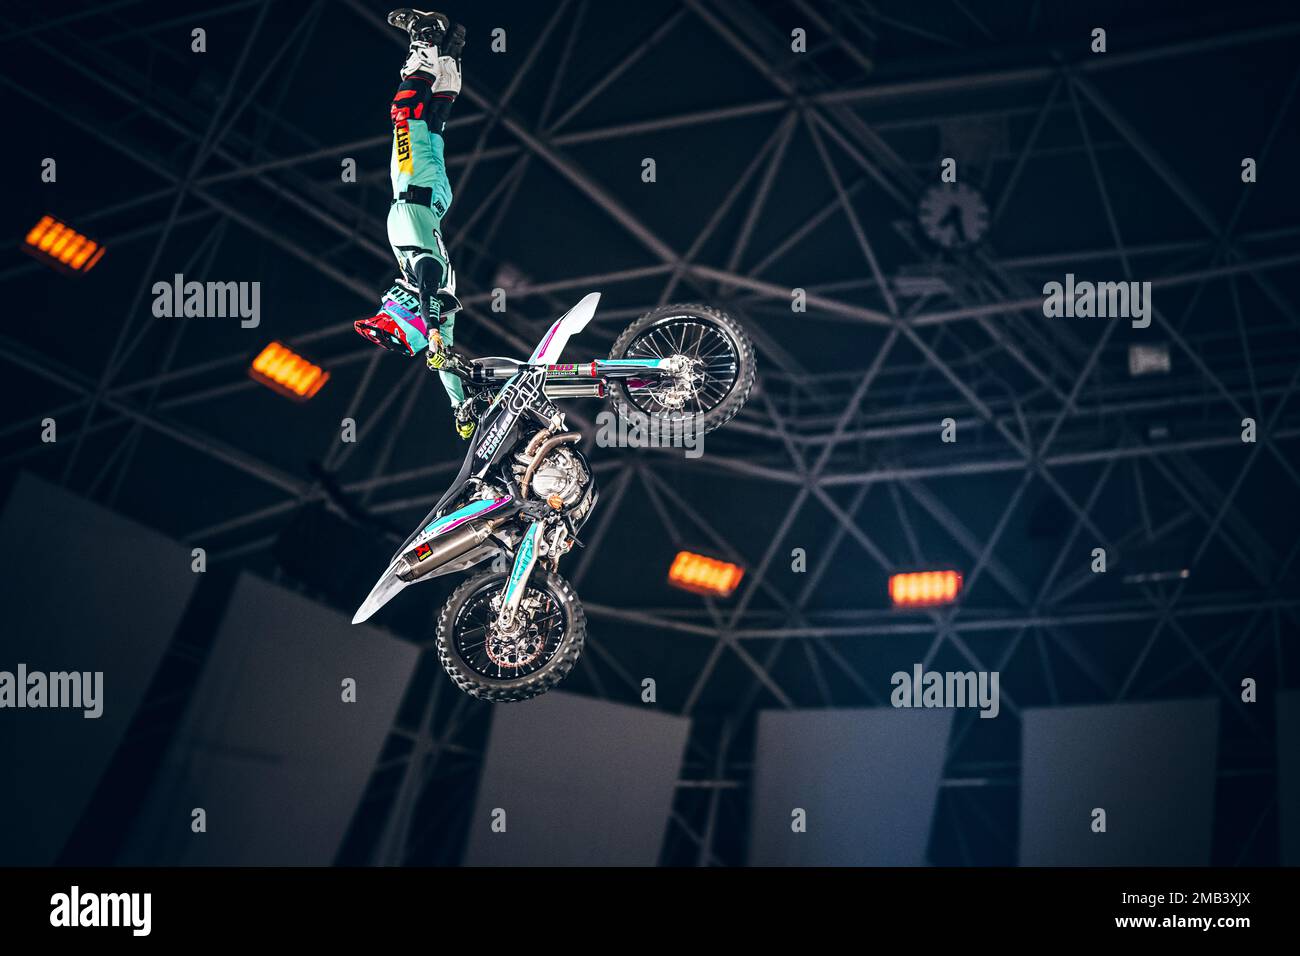 Dany Torres participating in a Freestyle event in Spain. Stock Photo